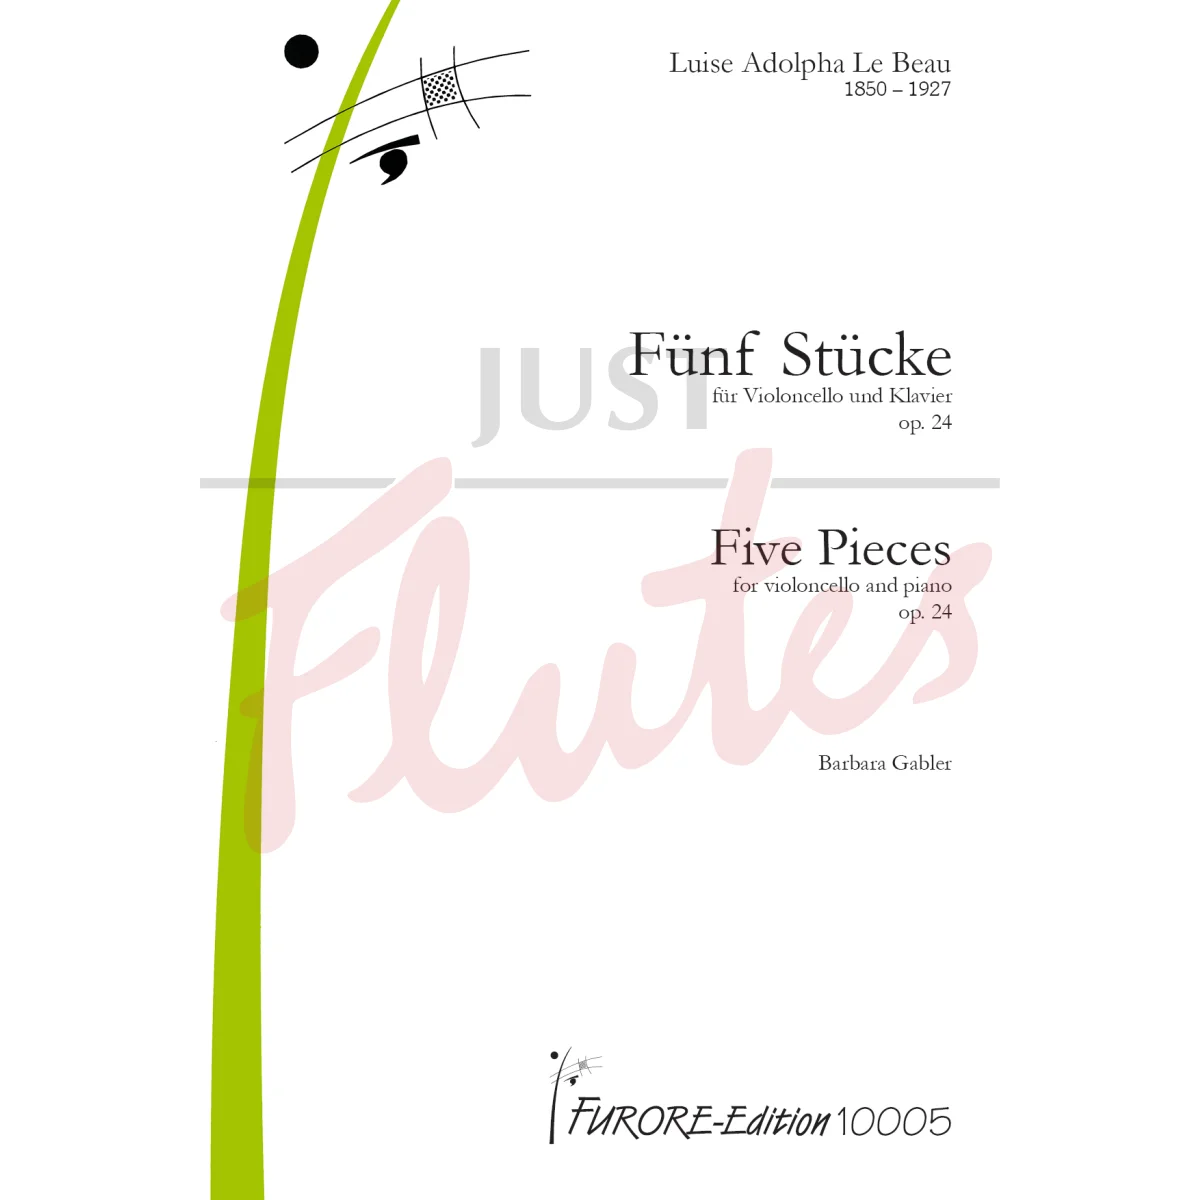 Five Pieces for Cello and Piano